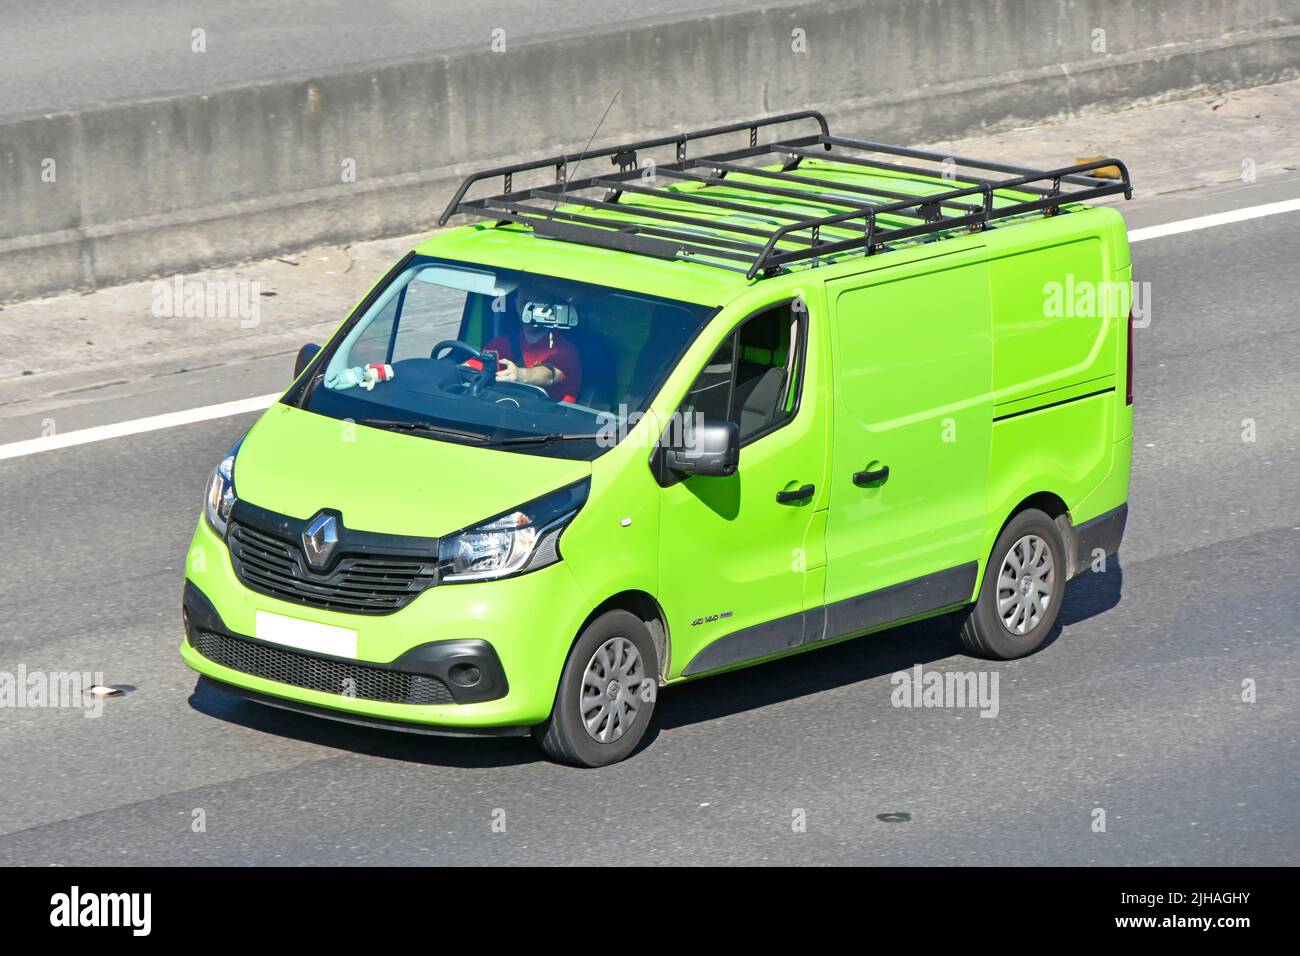 Close up side front & aerial view lime green colour clean unmarked Renault van roof rack driver driving along UK motorway road concrete crash barrier Stock Photo